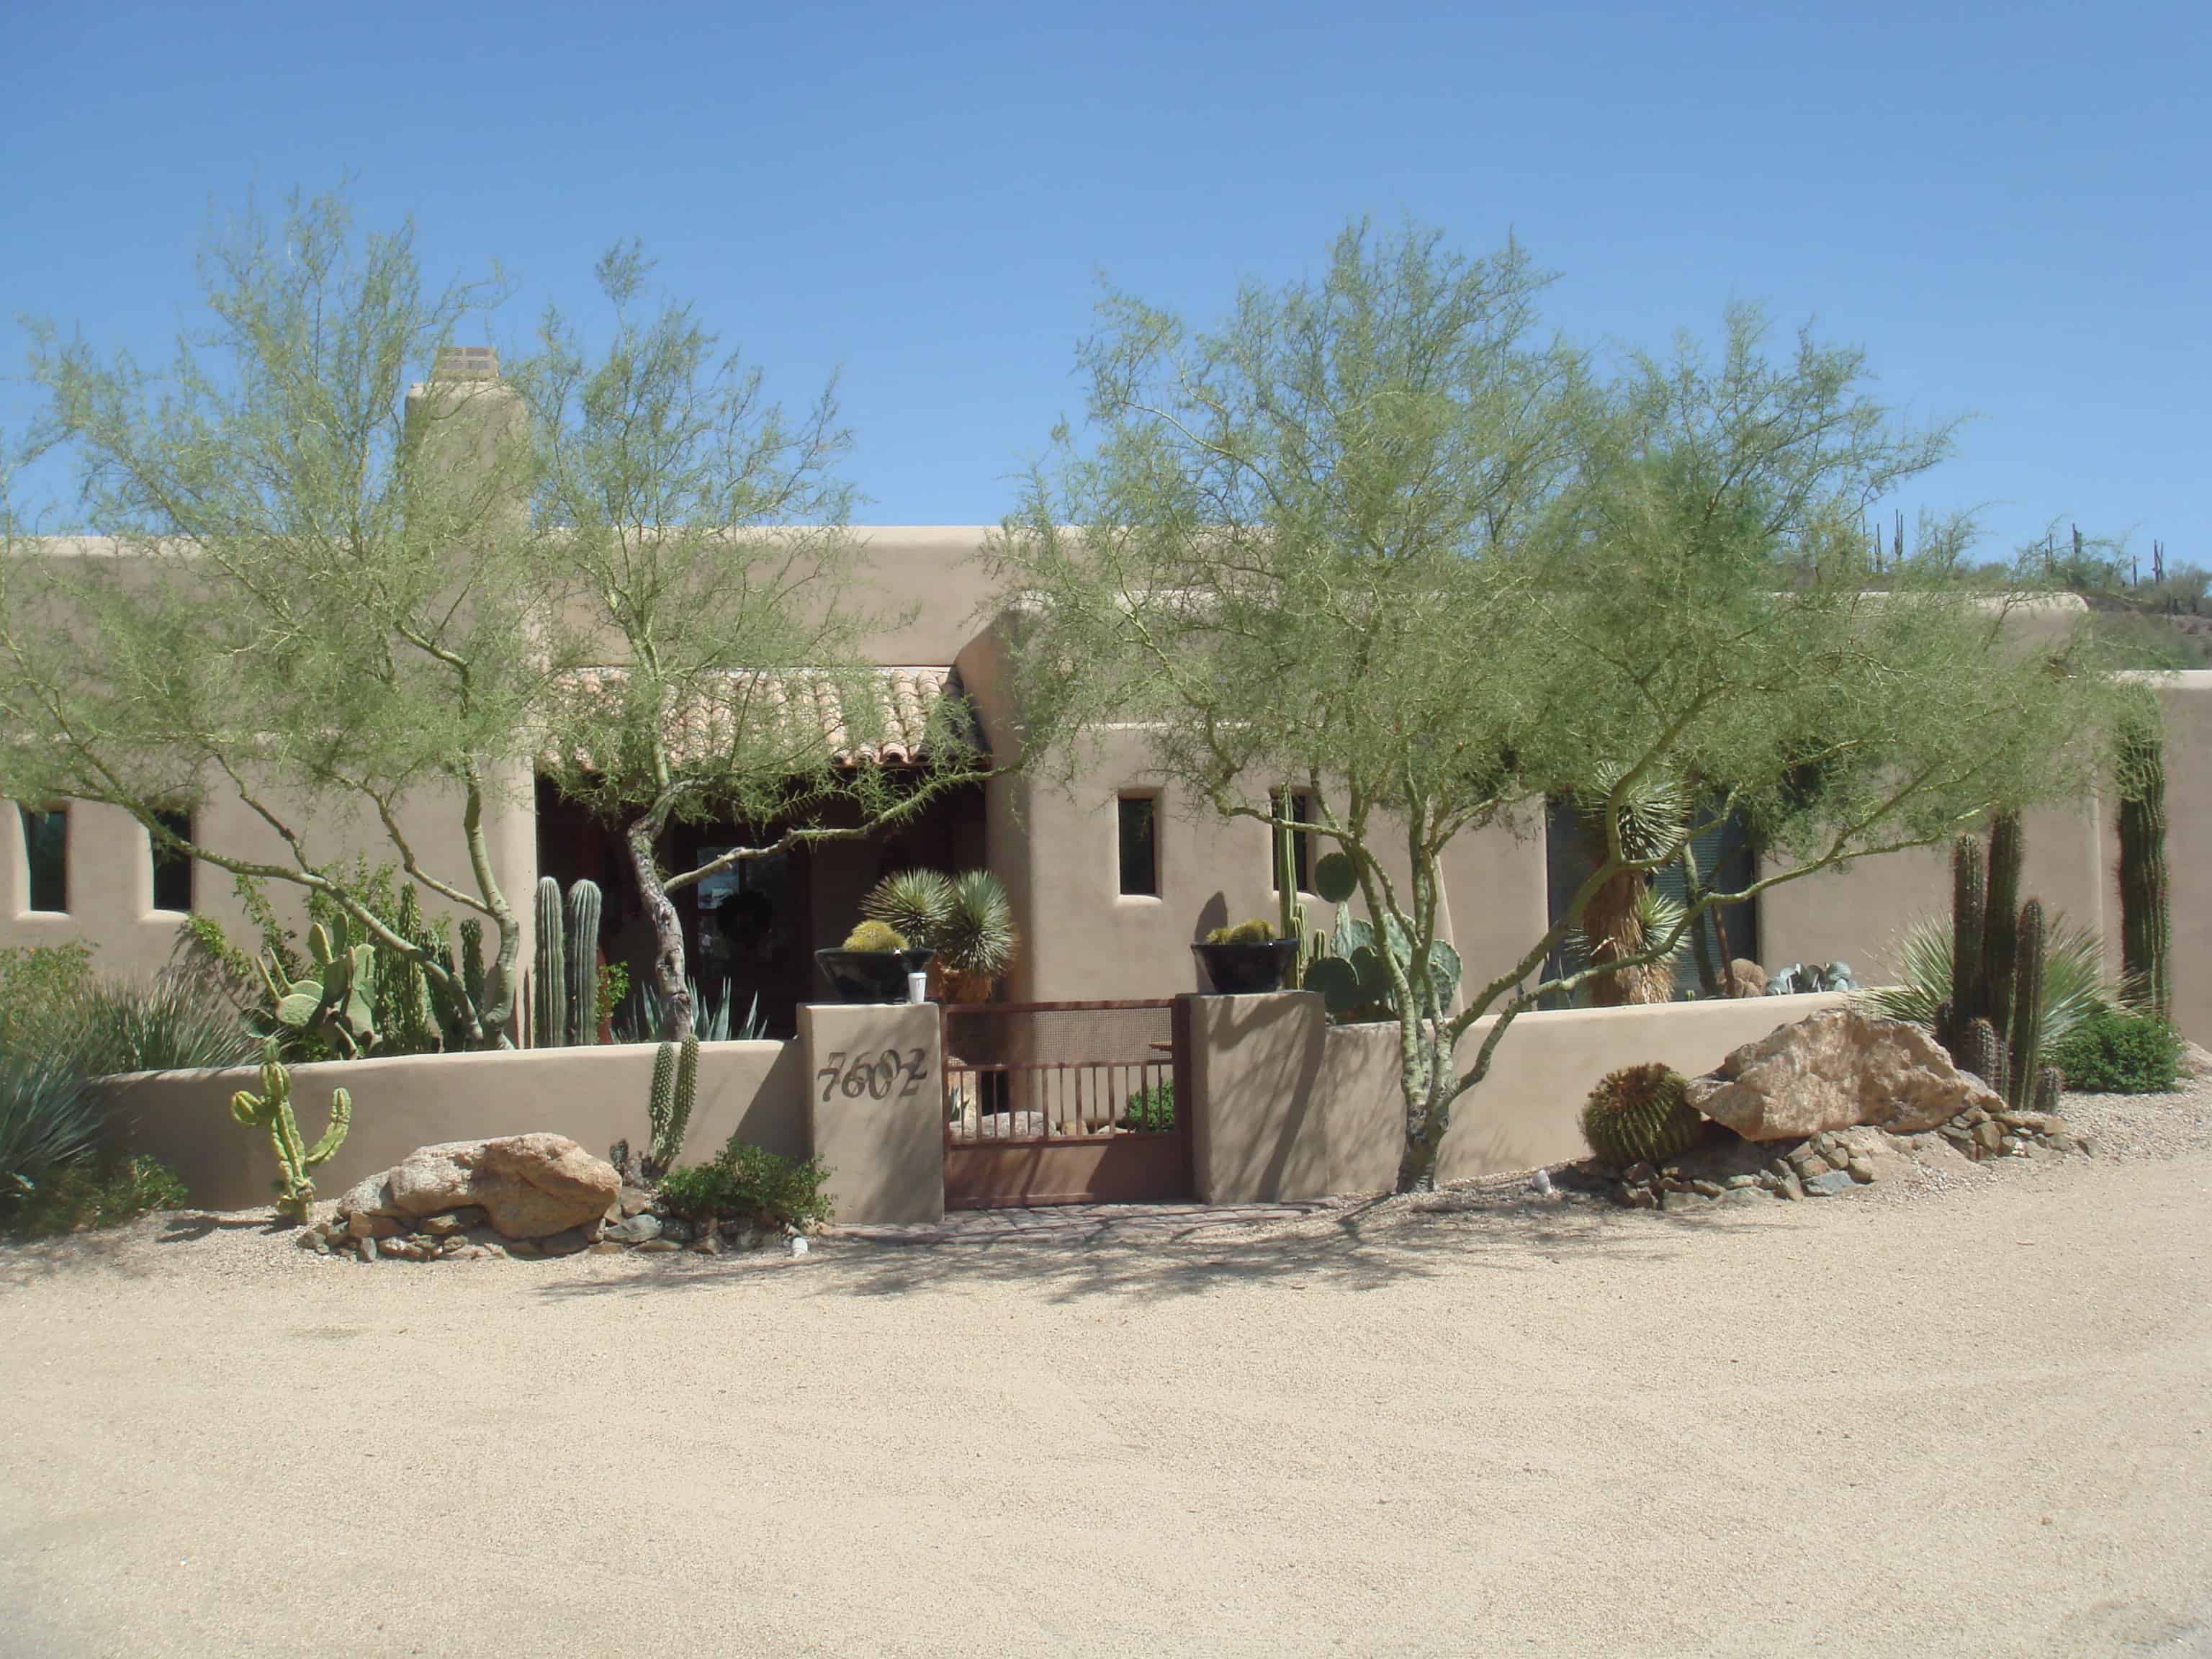 Scottsdale Real Estate News & Lifestyle : What is Desert ...